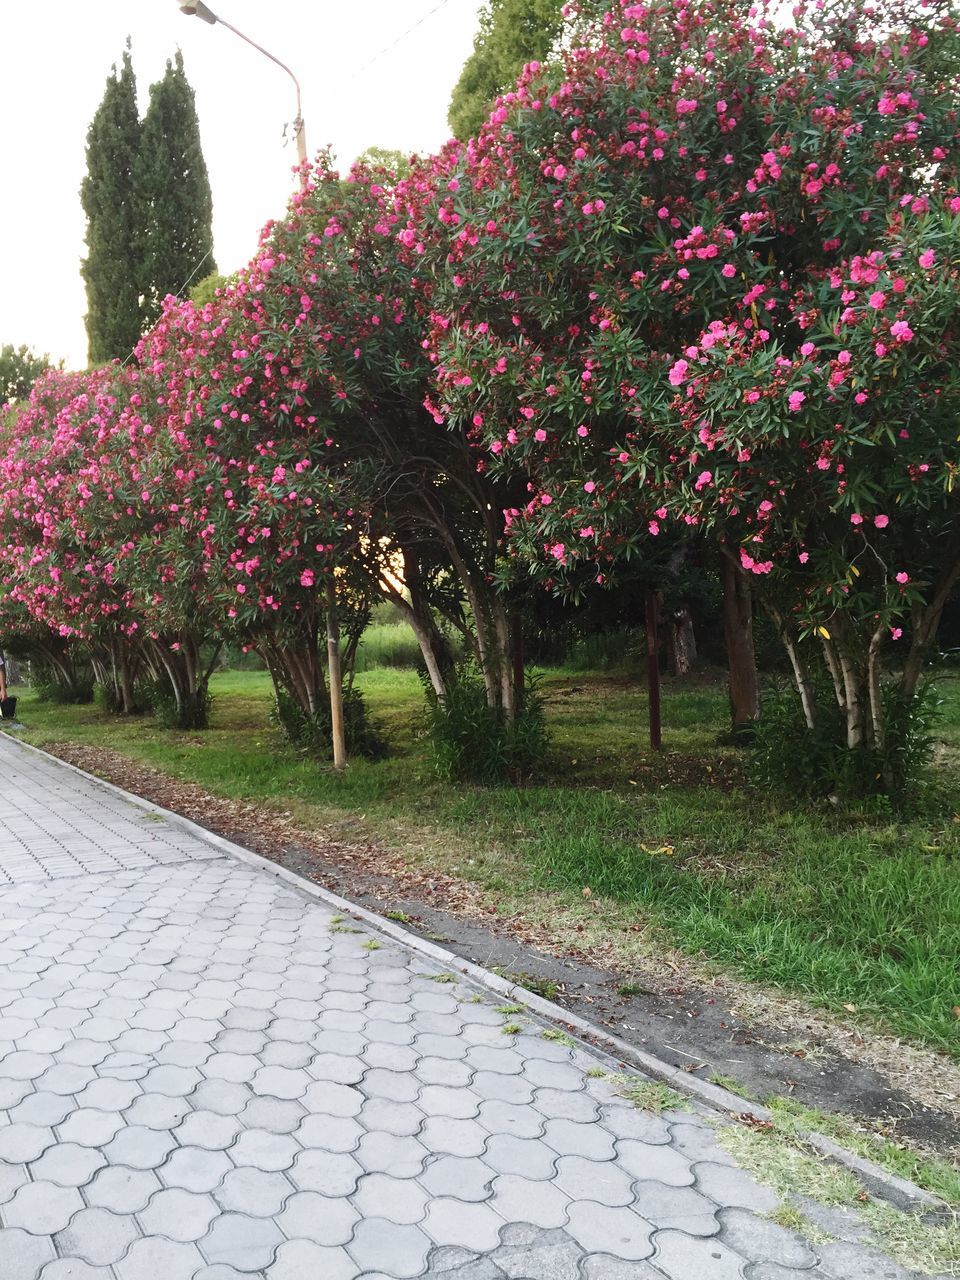 flower, tree, growth, freshness, beauty in nature, nature, plant, blossom, park - man made space, tranquility, footpath, pink color, fragility, tranquil scene, day, grass, in bloom, outdoors, springtime, no people